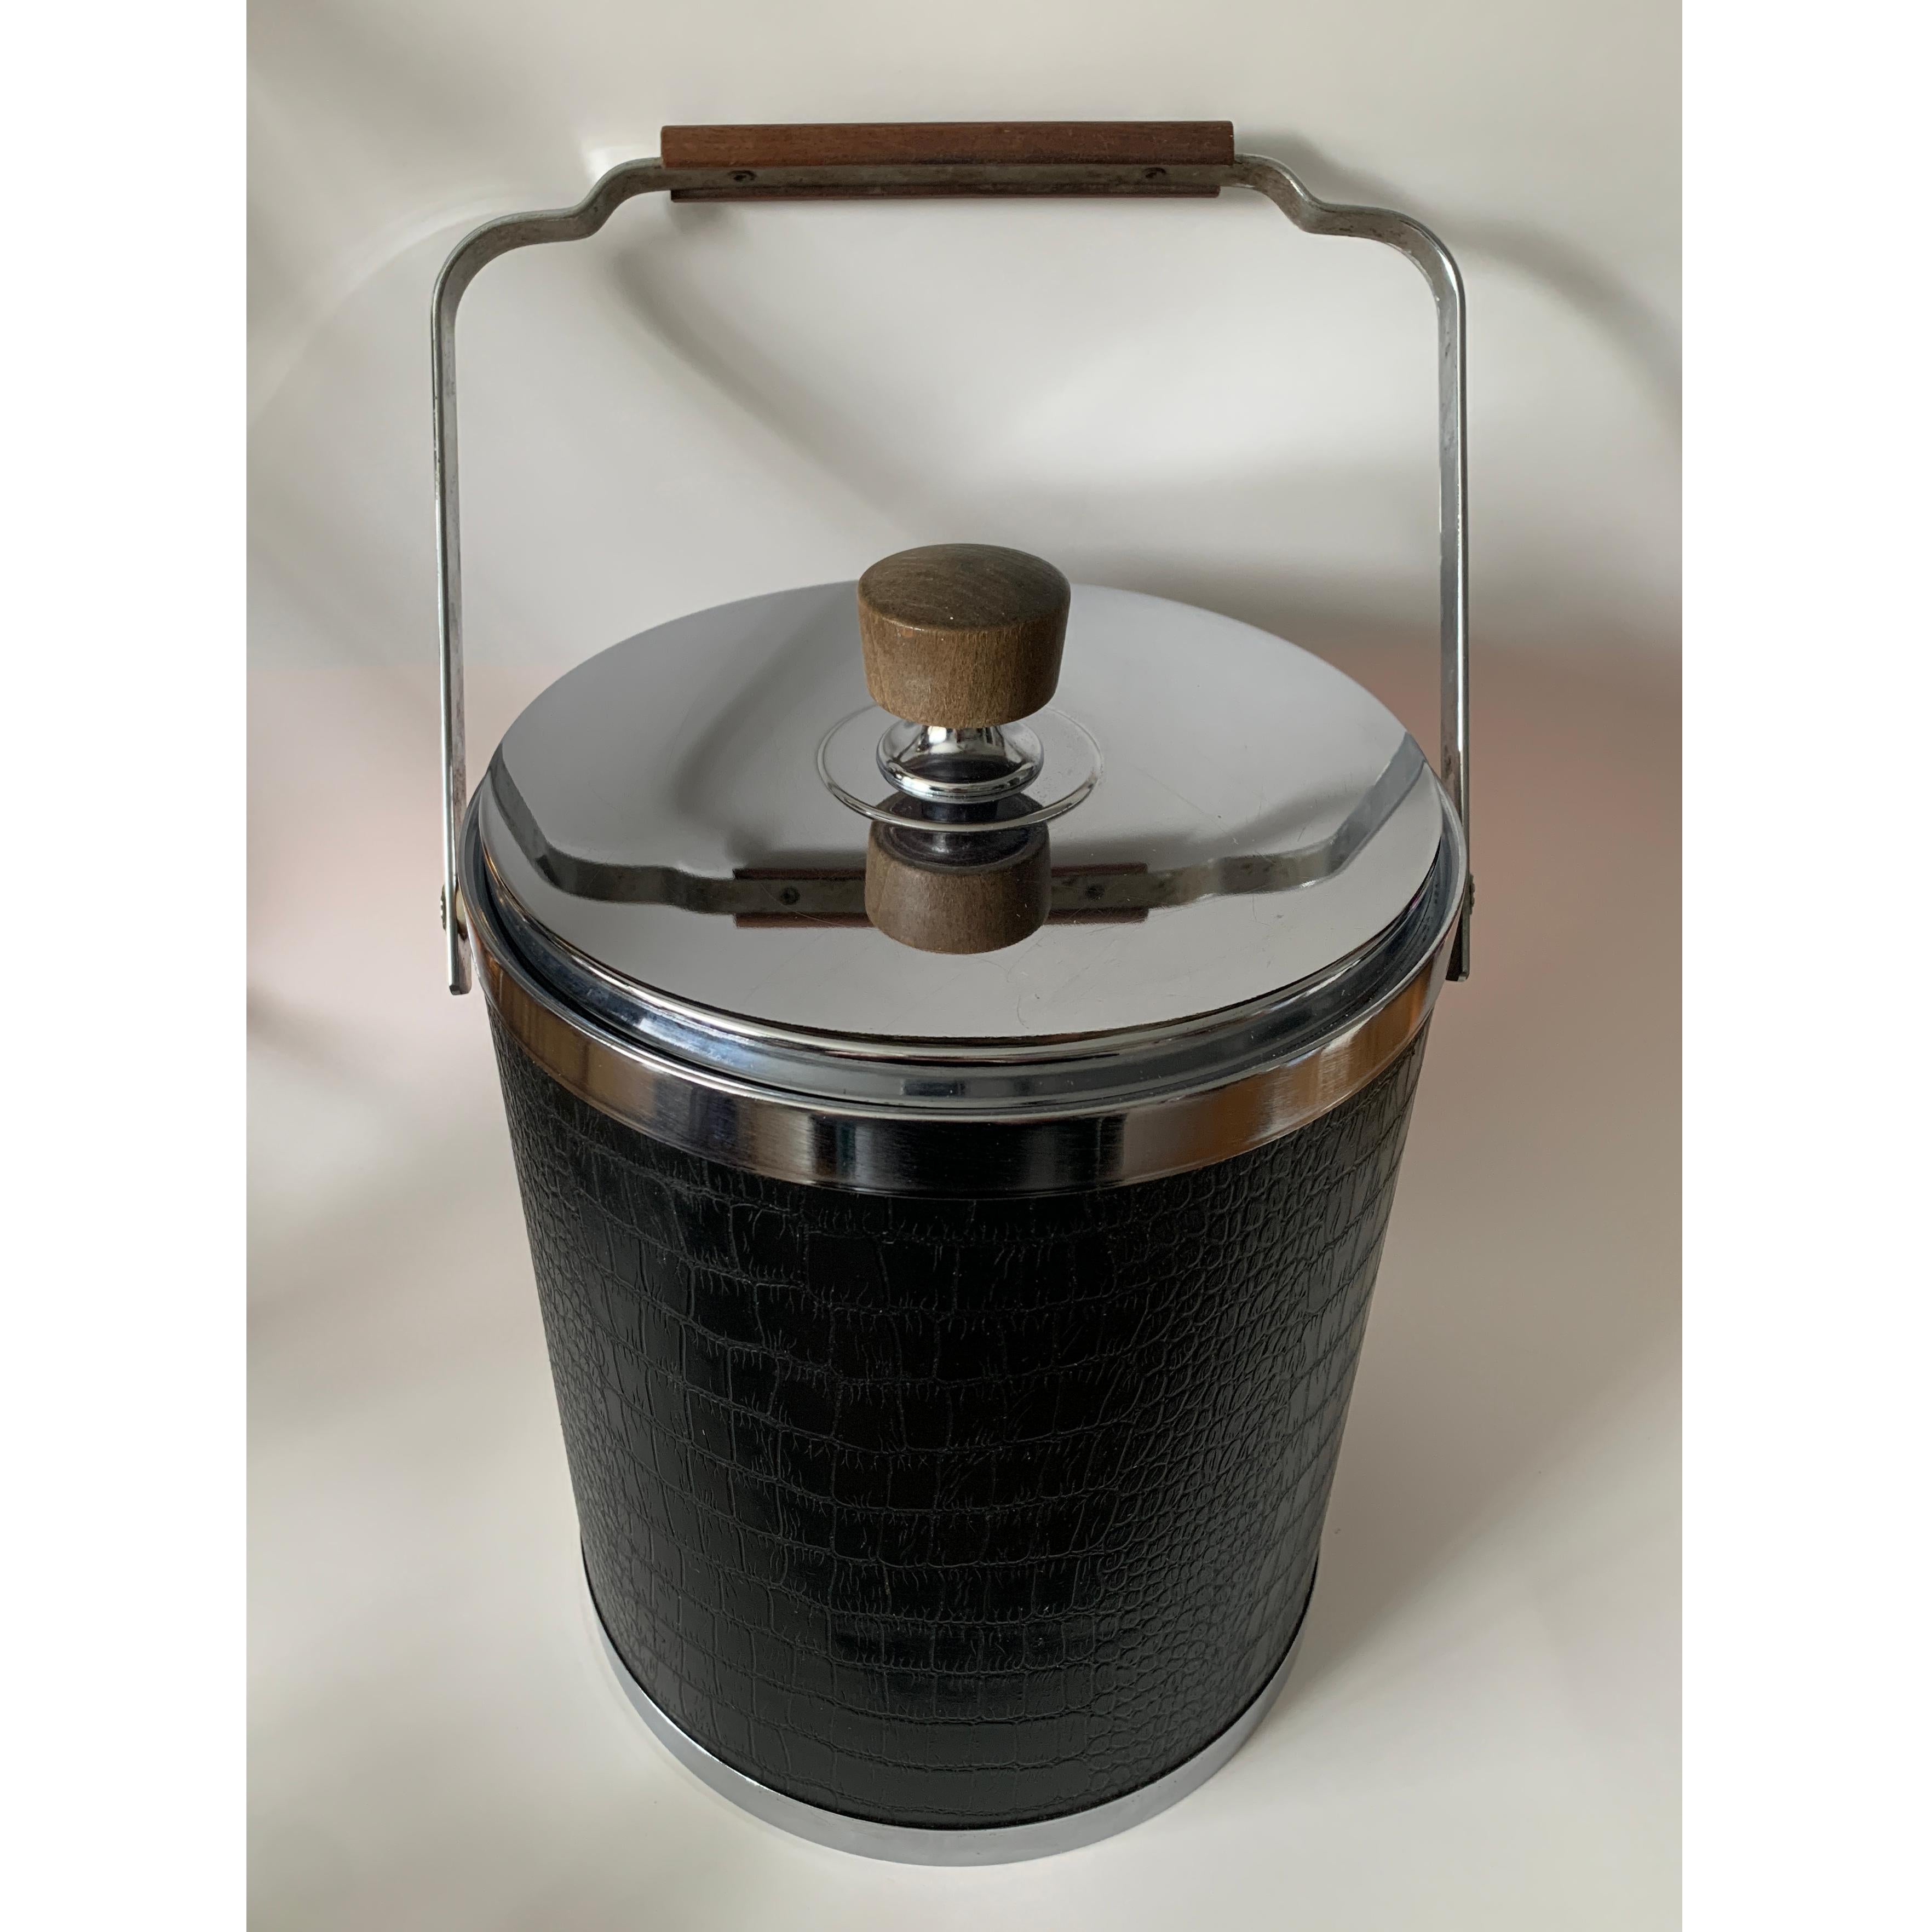 Vintage MCM ice bucket by Kromex

This chrome ice bucket is a cool as the ice it handles; with wooden handles and decorated in true 1960’s fashion with faux black leather crocodile print

Measures approx 11” high (not including handle) x 8 ¼” in